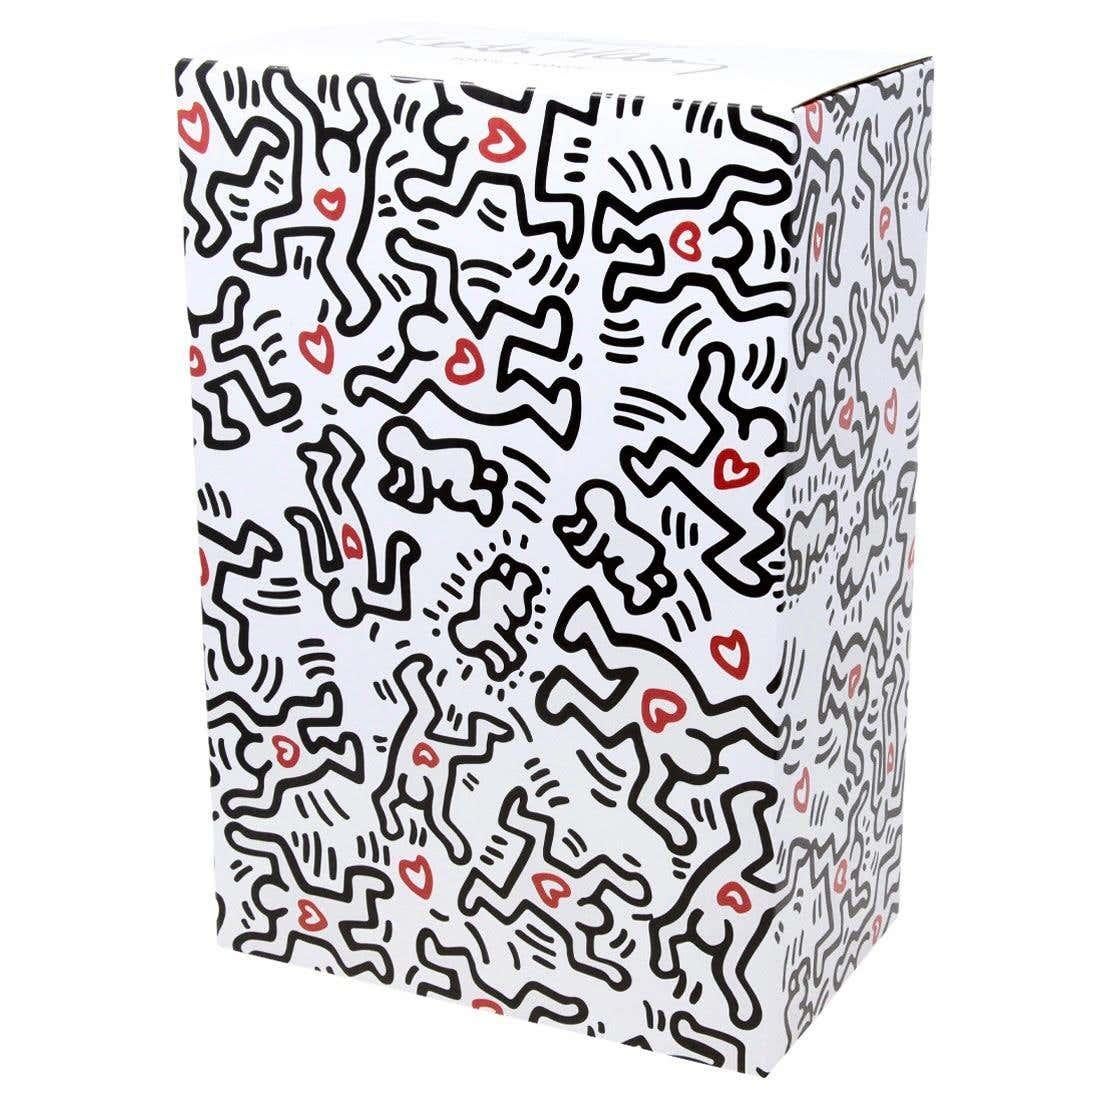 Basquiat Keith Haring Bearbrick 400% set of 2 works (Basquiat Haring BE@RBRICK) For Sale 1